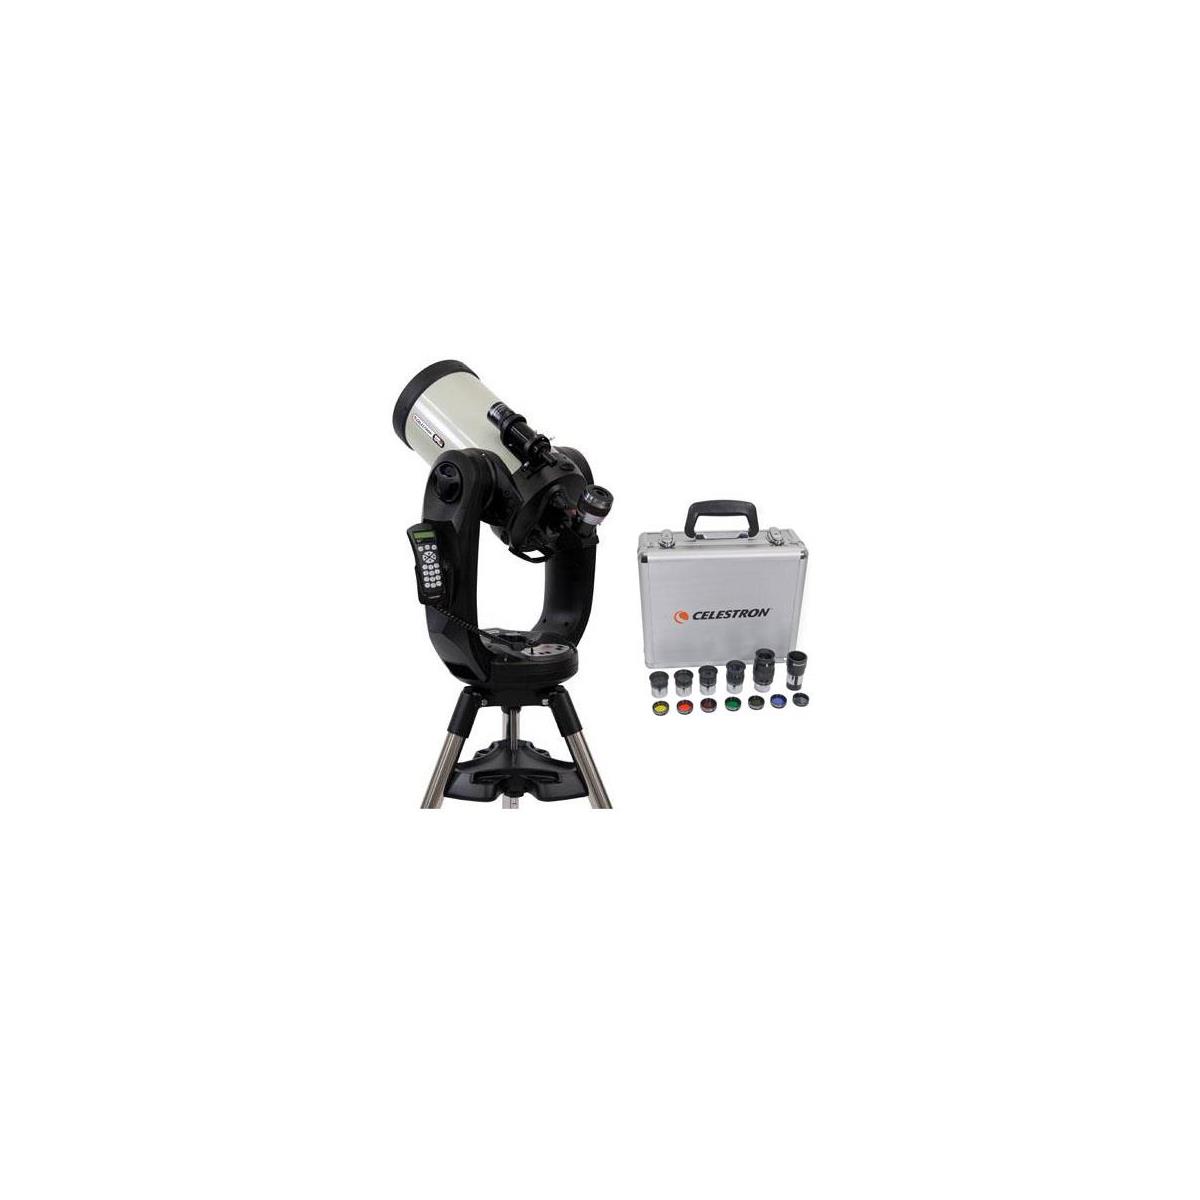 Image of Celestron CPC Deluxe 925 HD Computerized Telescope with Deluxe Accessory Kit